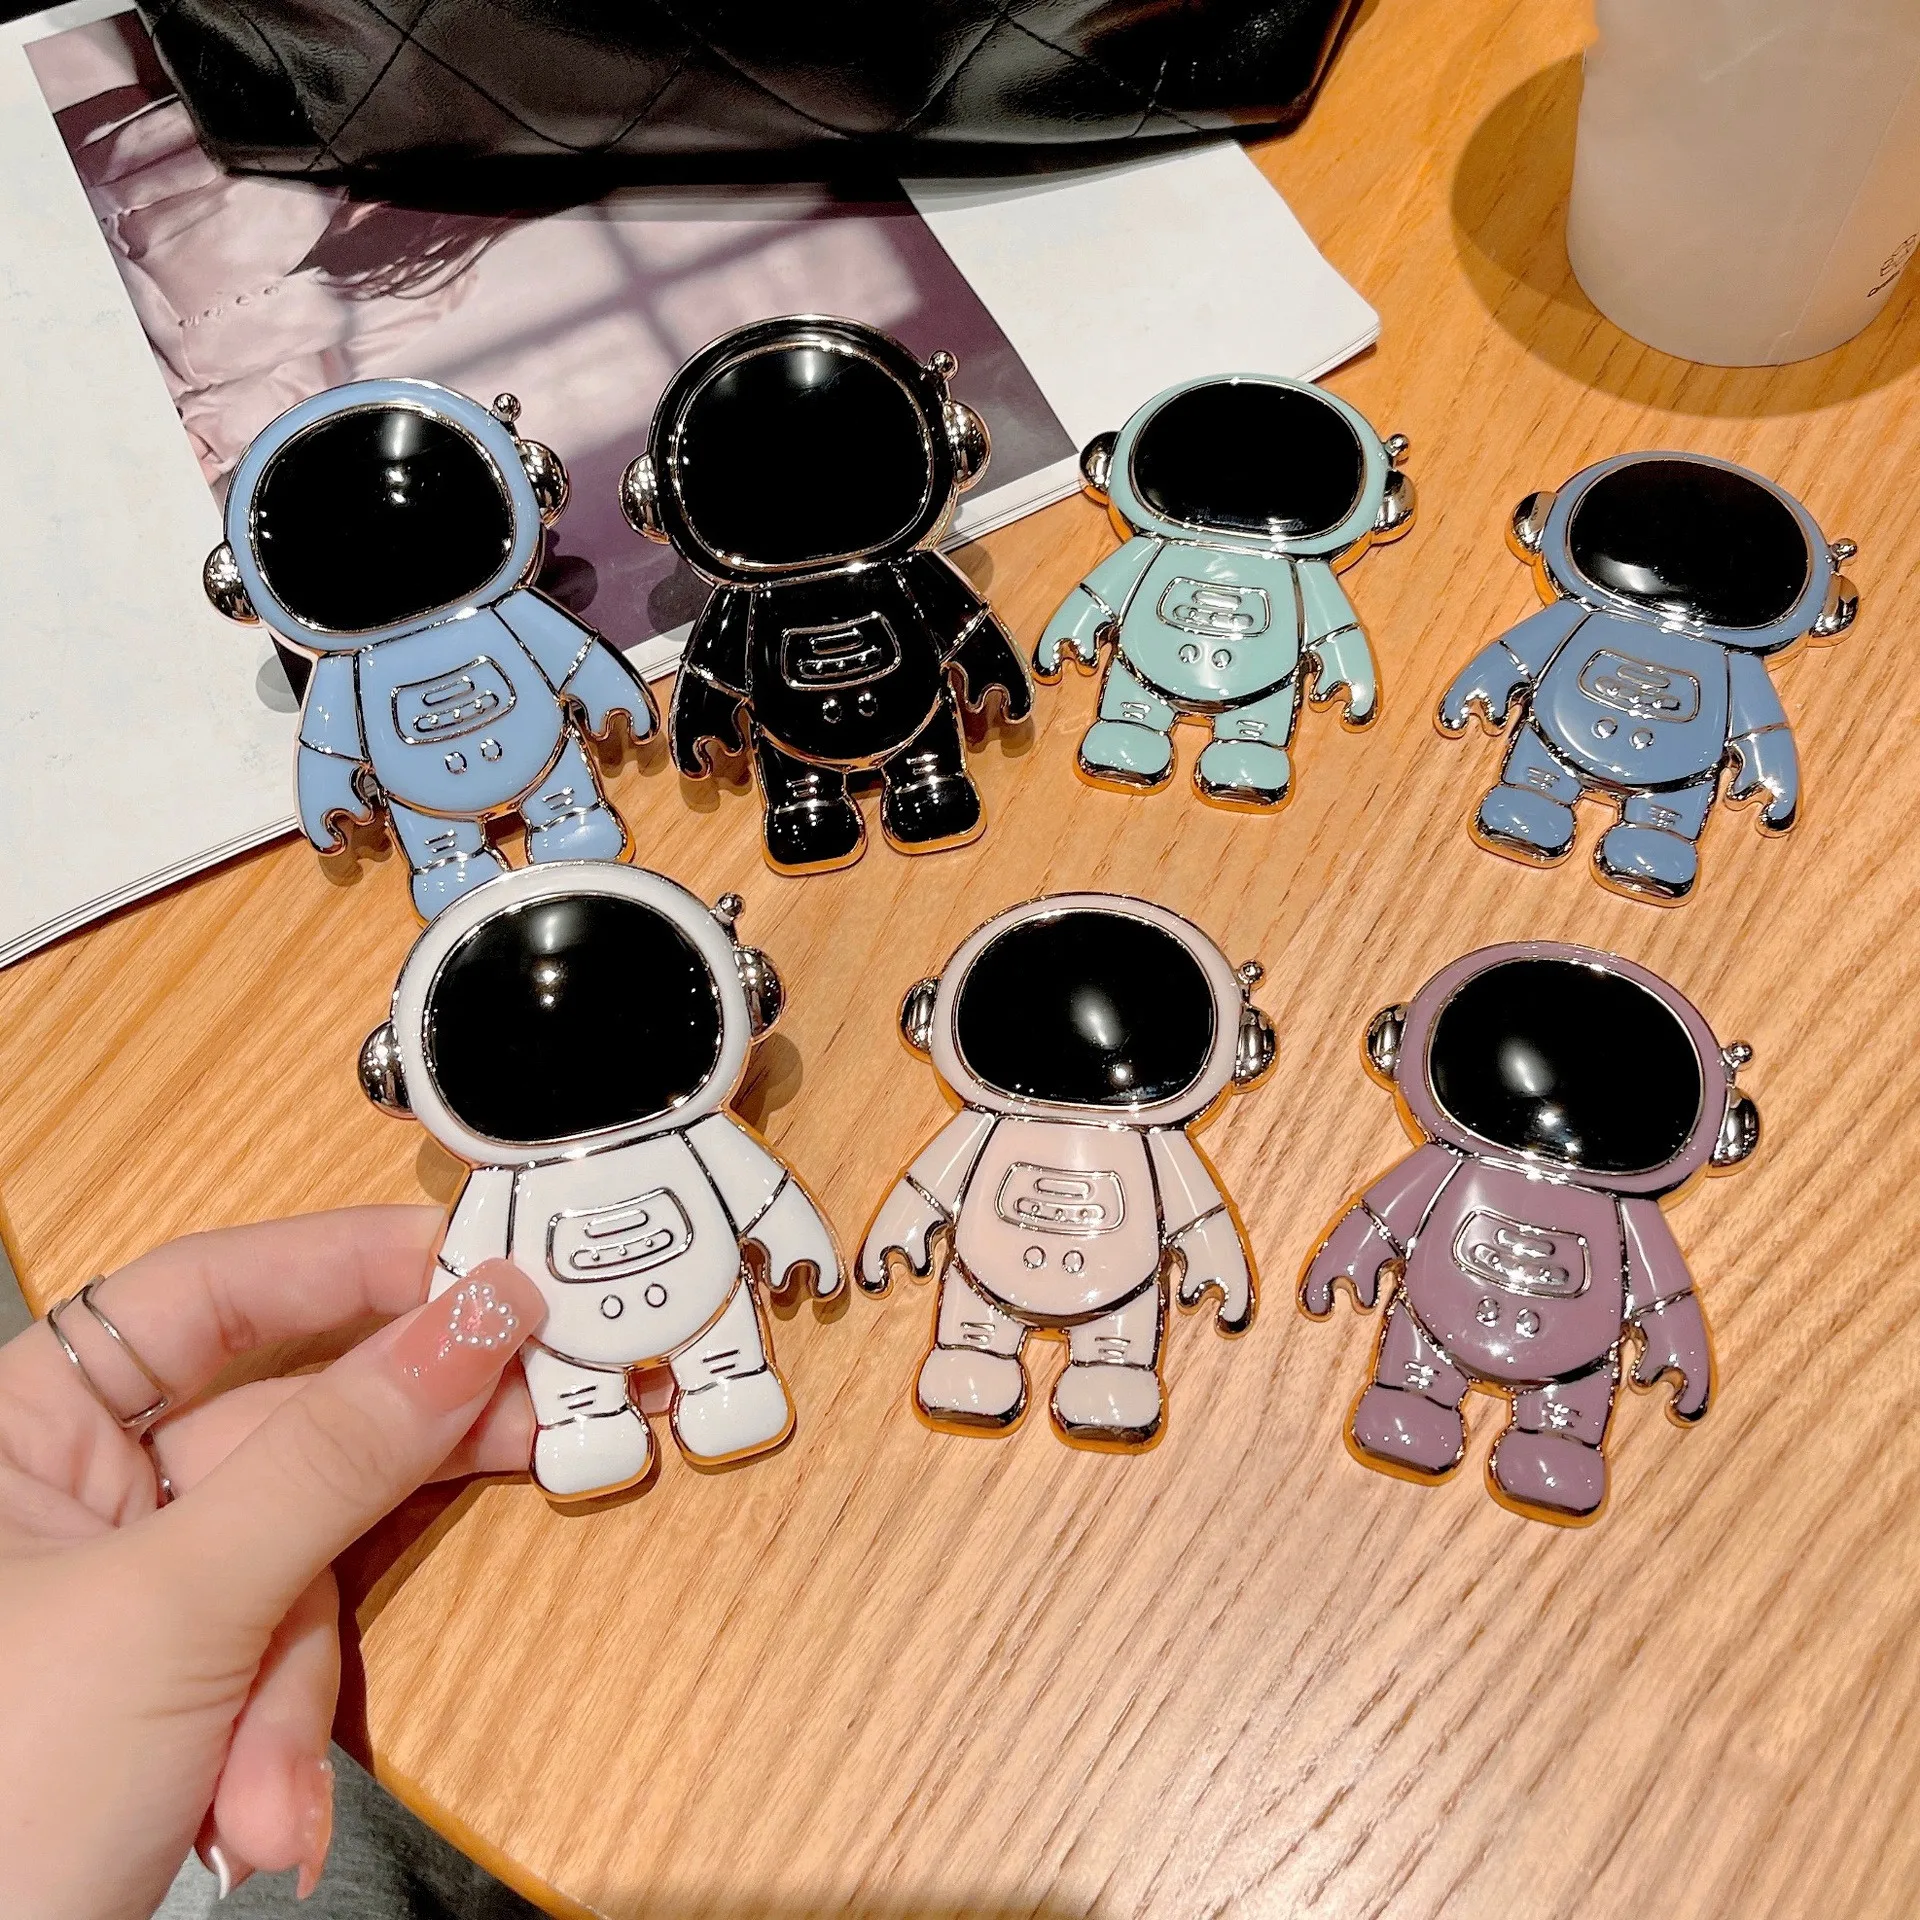 10pcs Space Man Astronaut Shaped Universal Phone Holder Griptok Support For Smartphone Foldable Phone Mount Finger Stand Socket